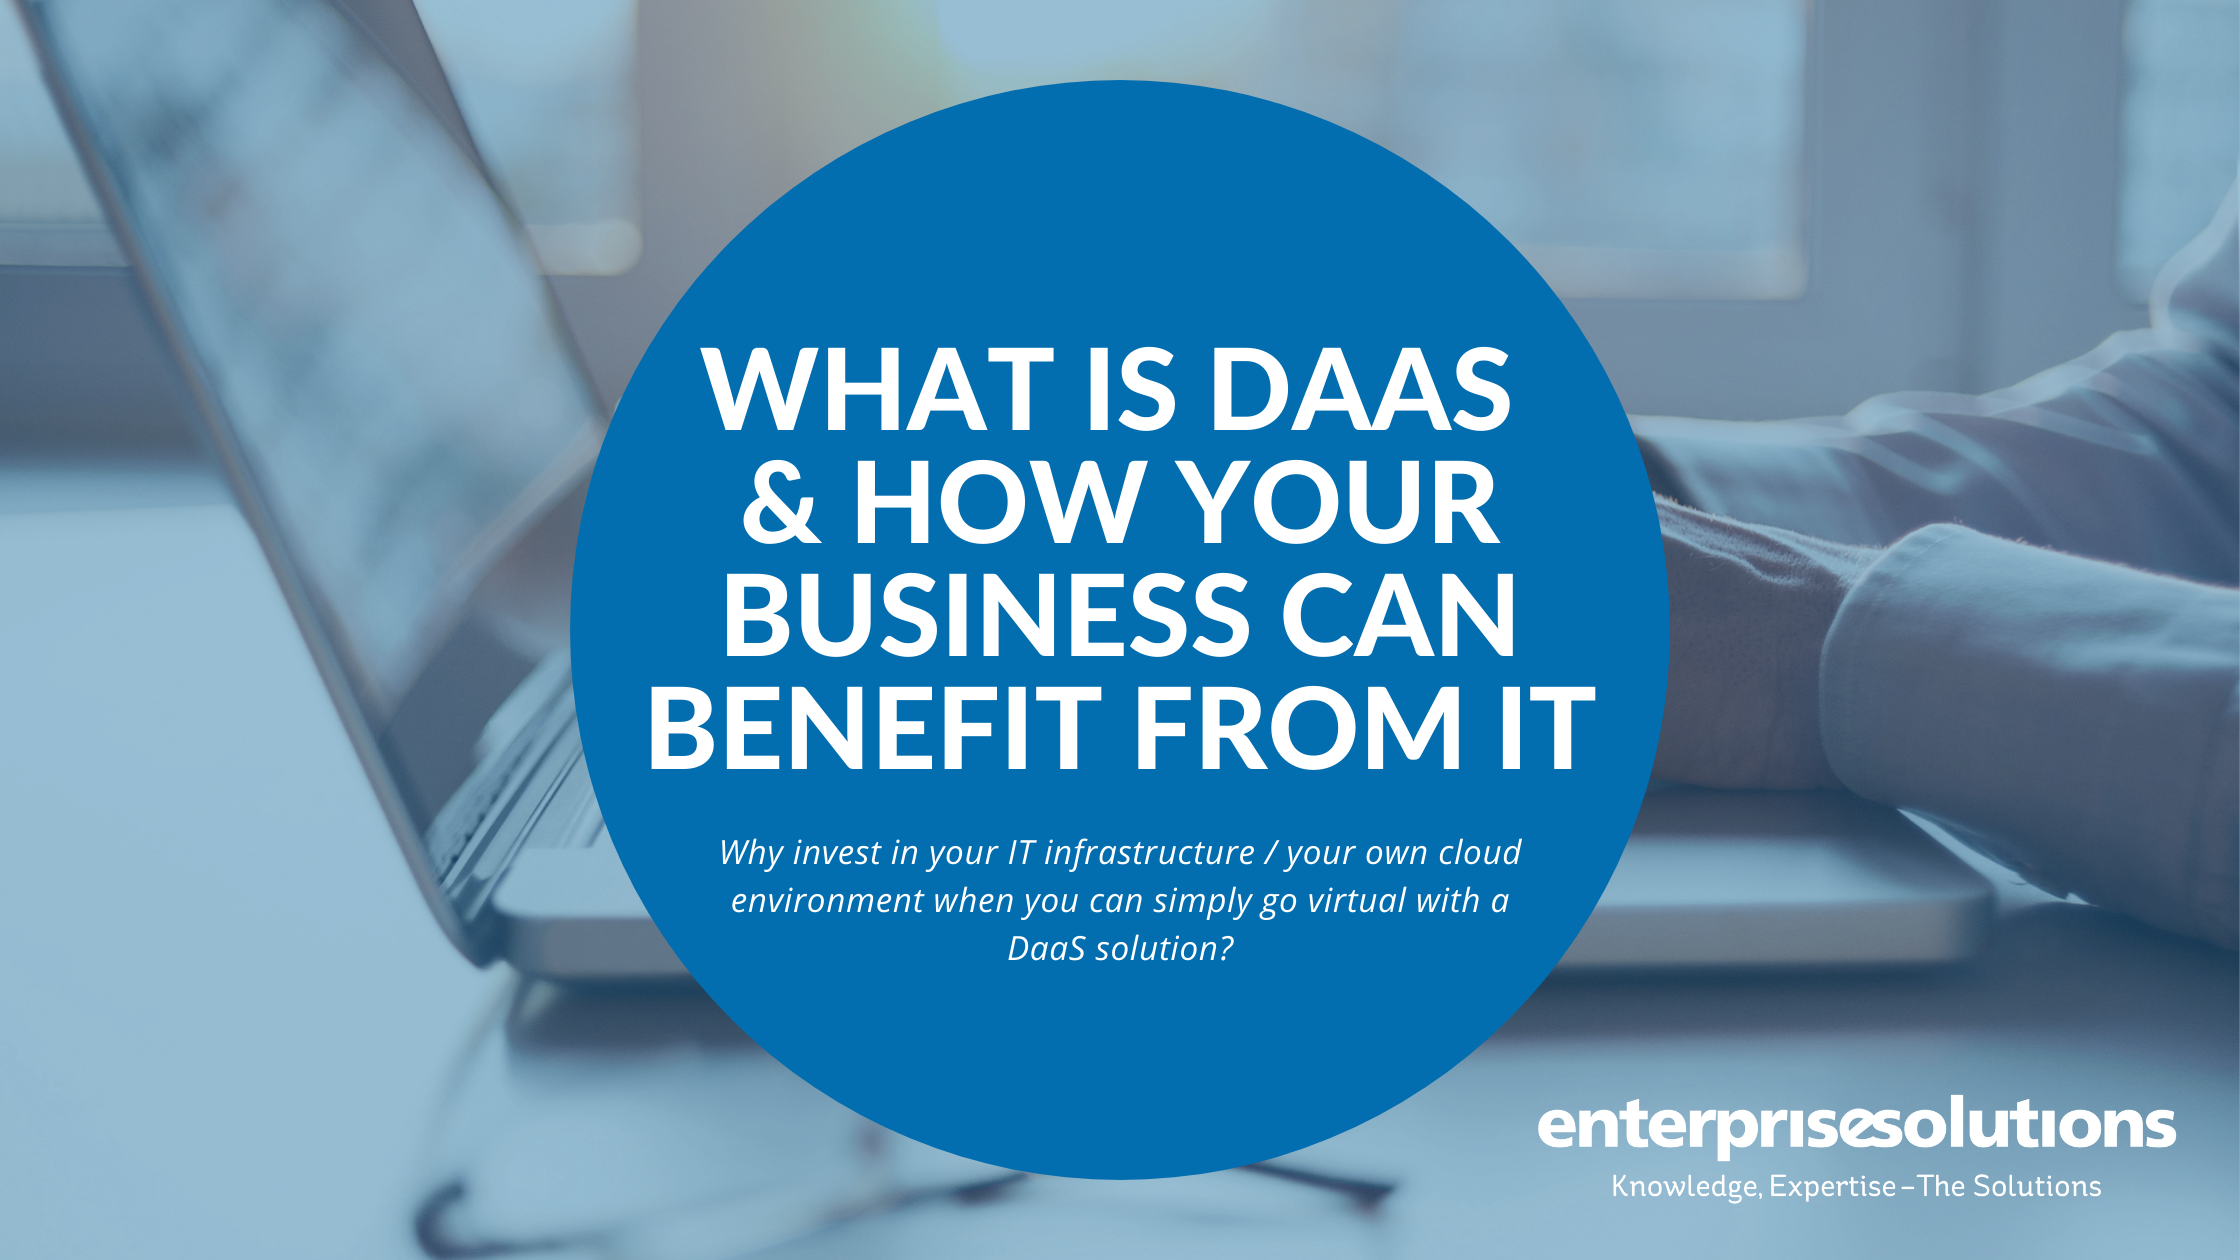 What is DaaS & How Your Business Can Benefit From It